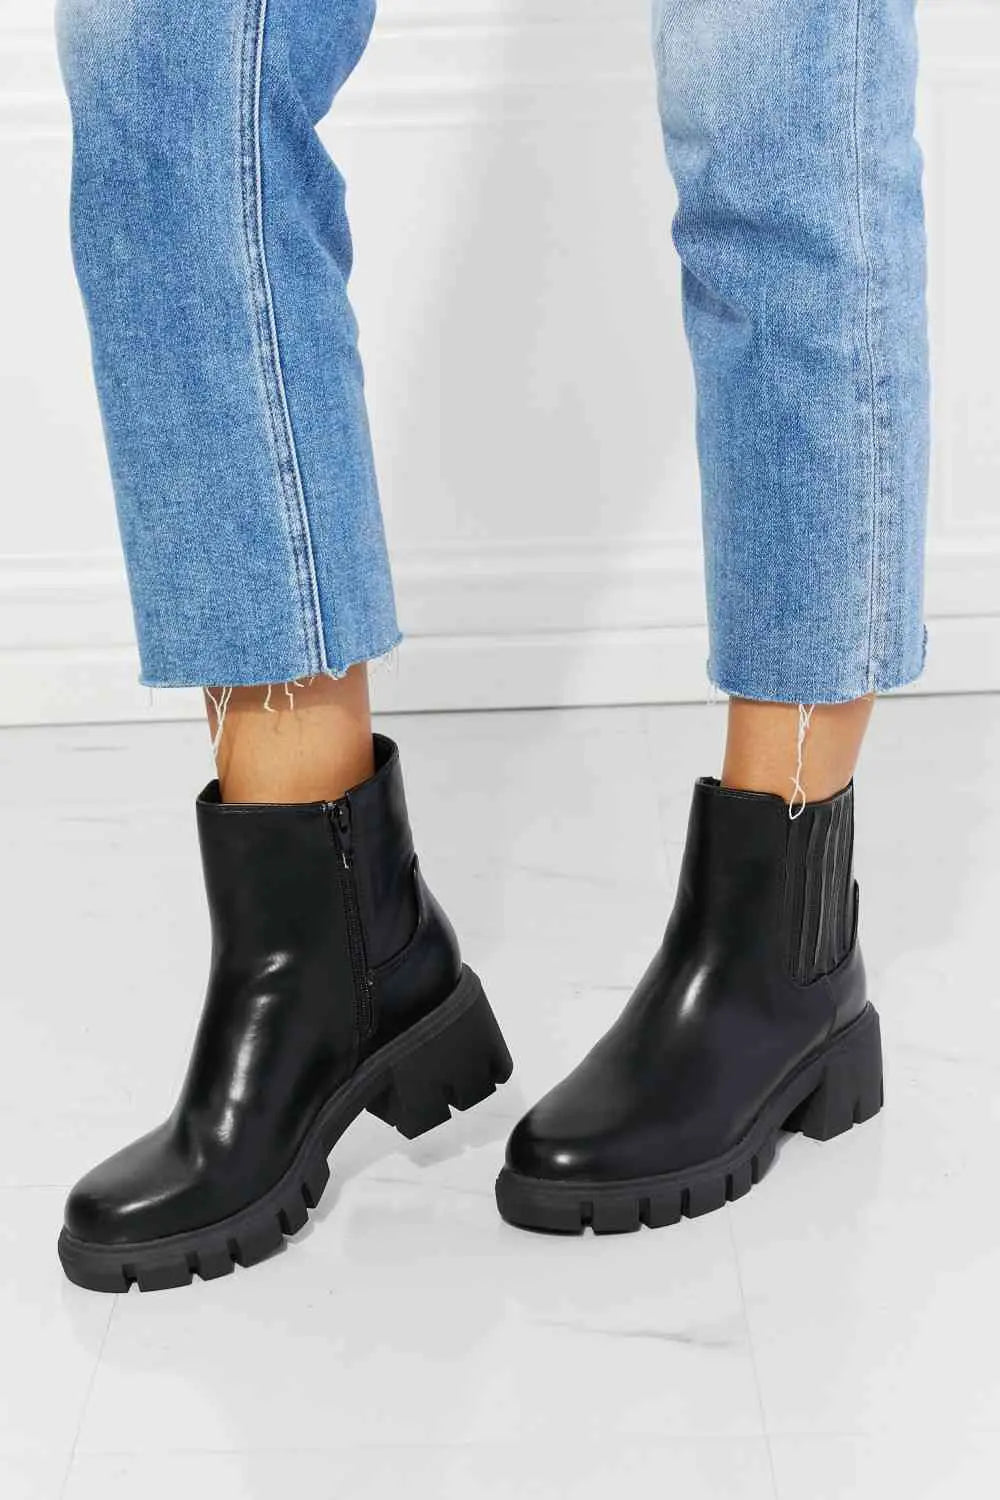 MMShoes What It Takes Lug Sole Chelsea Boots in Black - Image #1